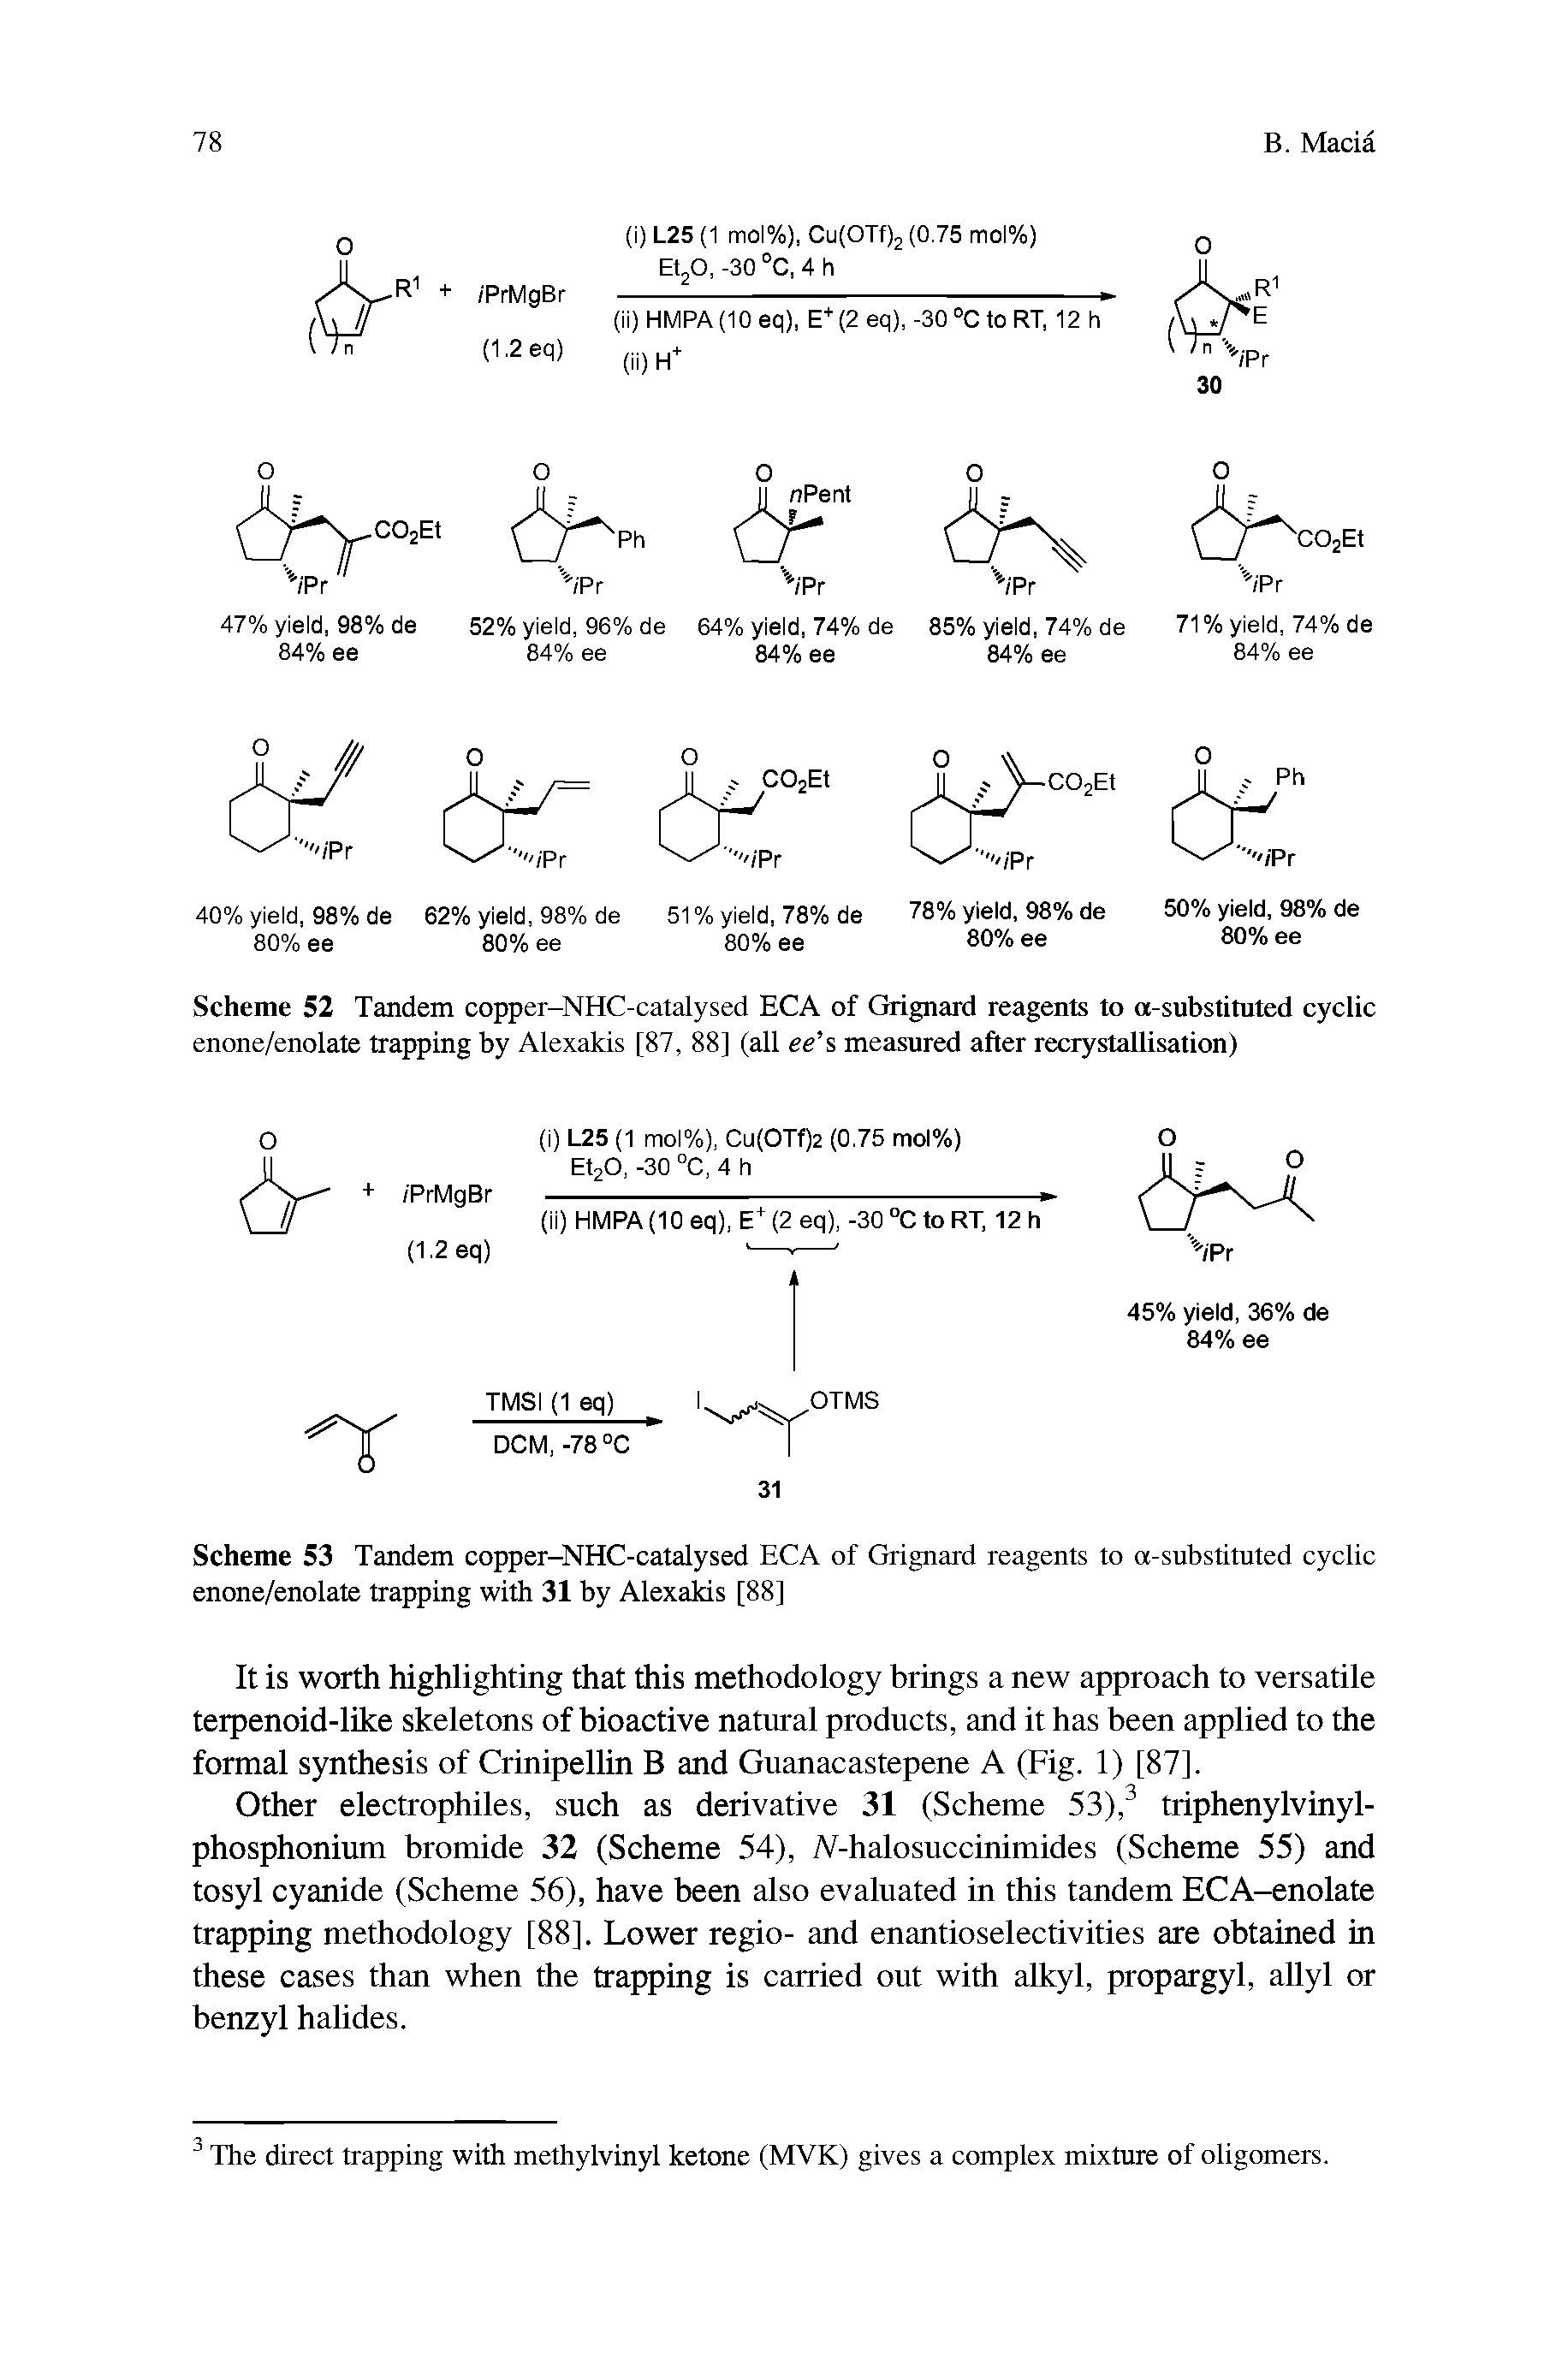 Scheme 52 Tandem copper-NHC-catalysed ECA of Grignard reagents to a-substituted cyclic enone/enolate trapping by Alexakis [87, 88] (all ee s measured after recrystallisation)...